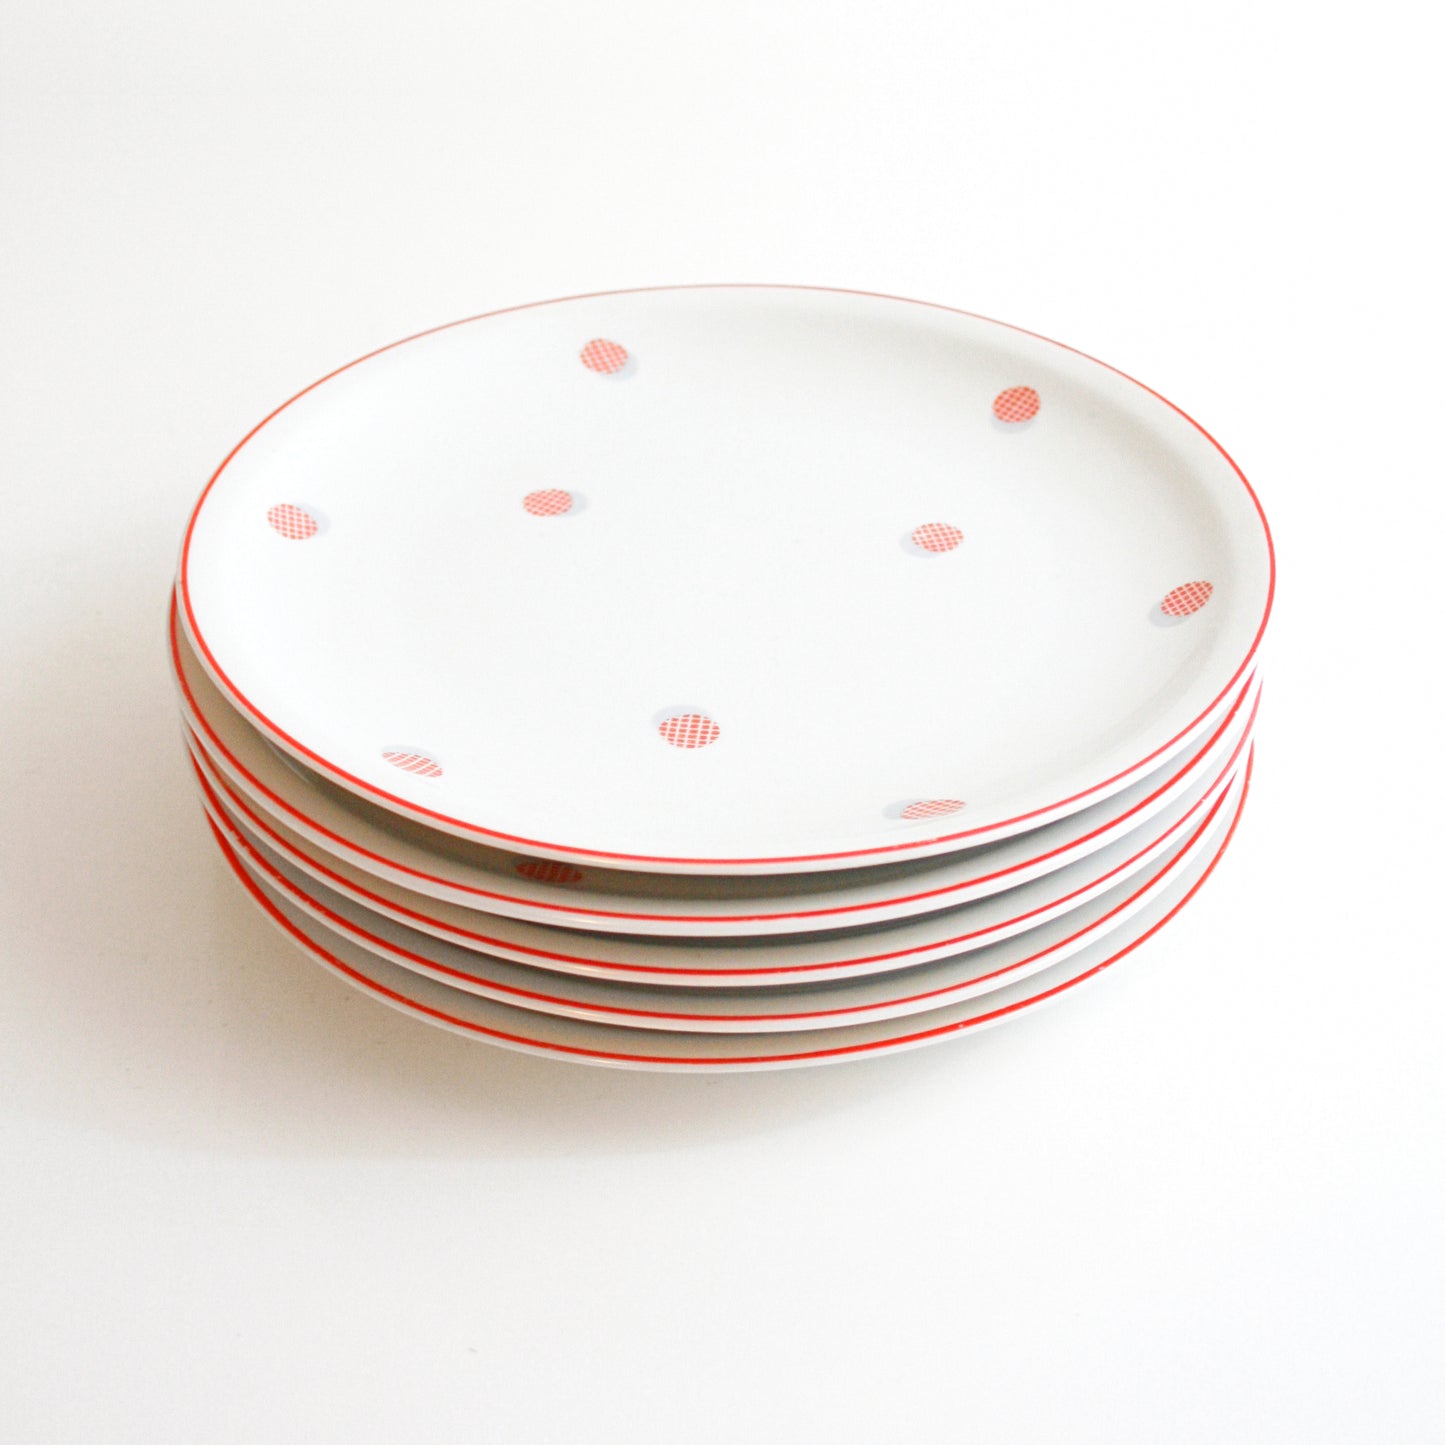 SOLD - Vintage 1940s Polka Dot Plates / Red and White Polka Dot Dishes by Shirnding Bavaria